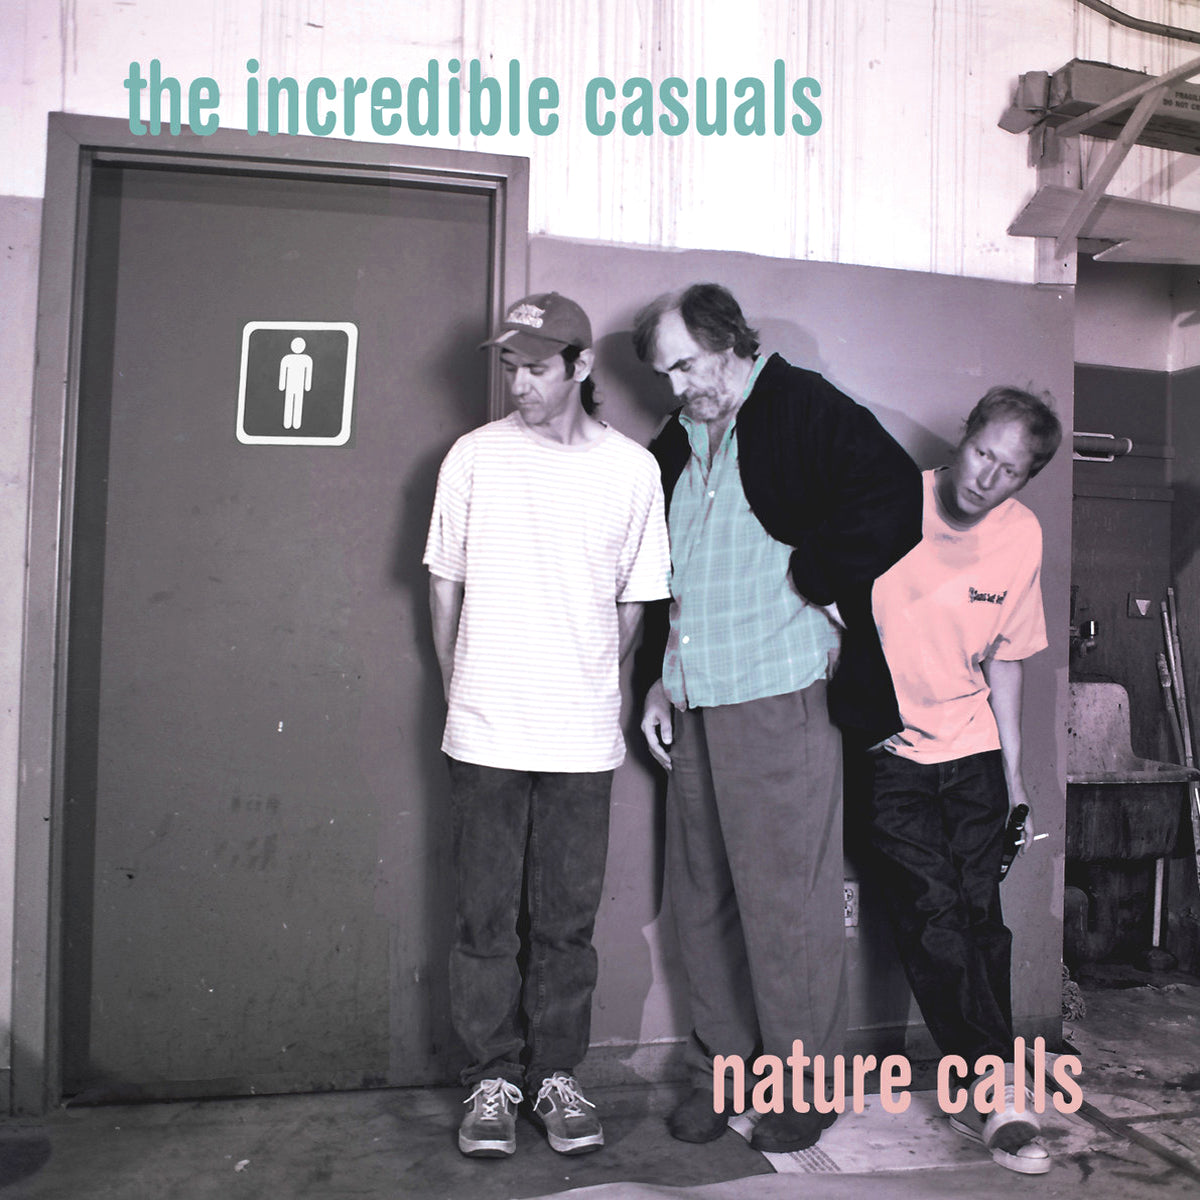 The Incredible Casuals- Nature Calls CD ~REISSUE / EX NRBQ!